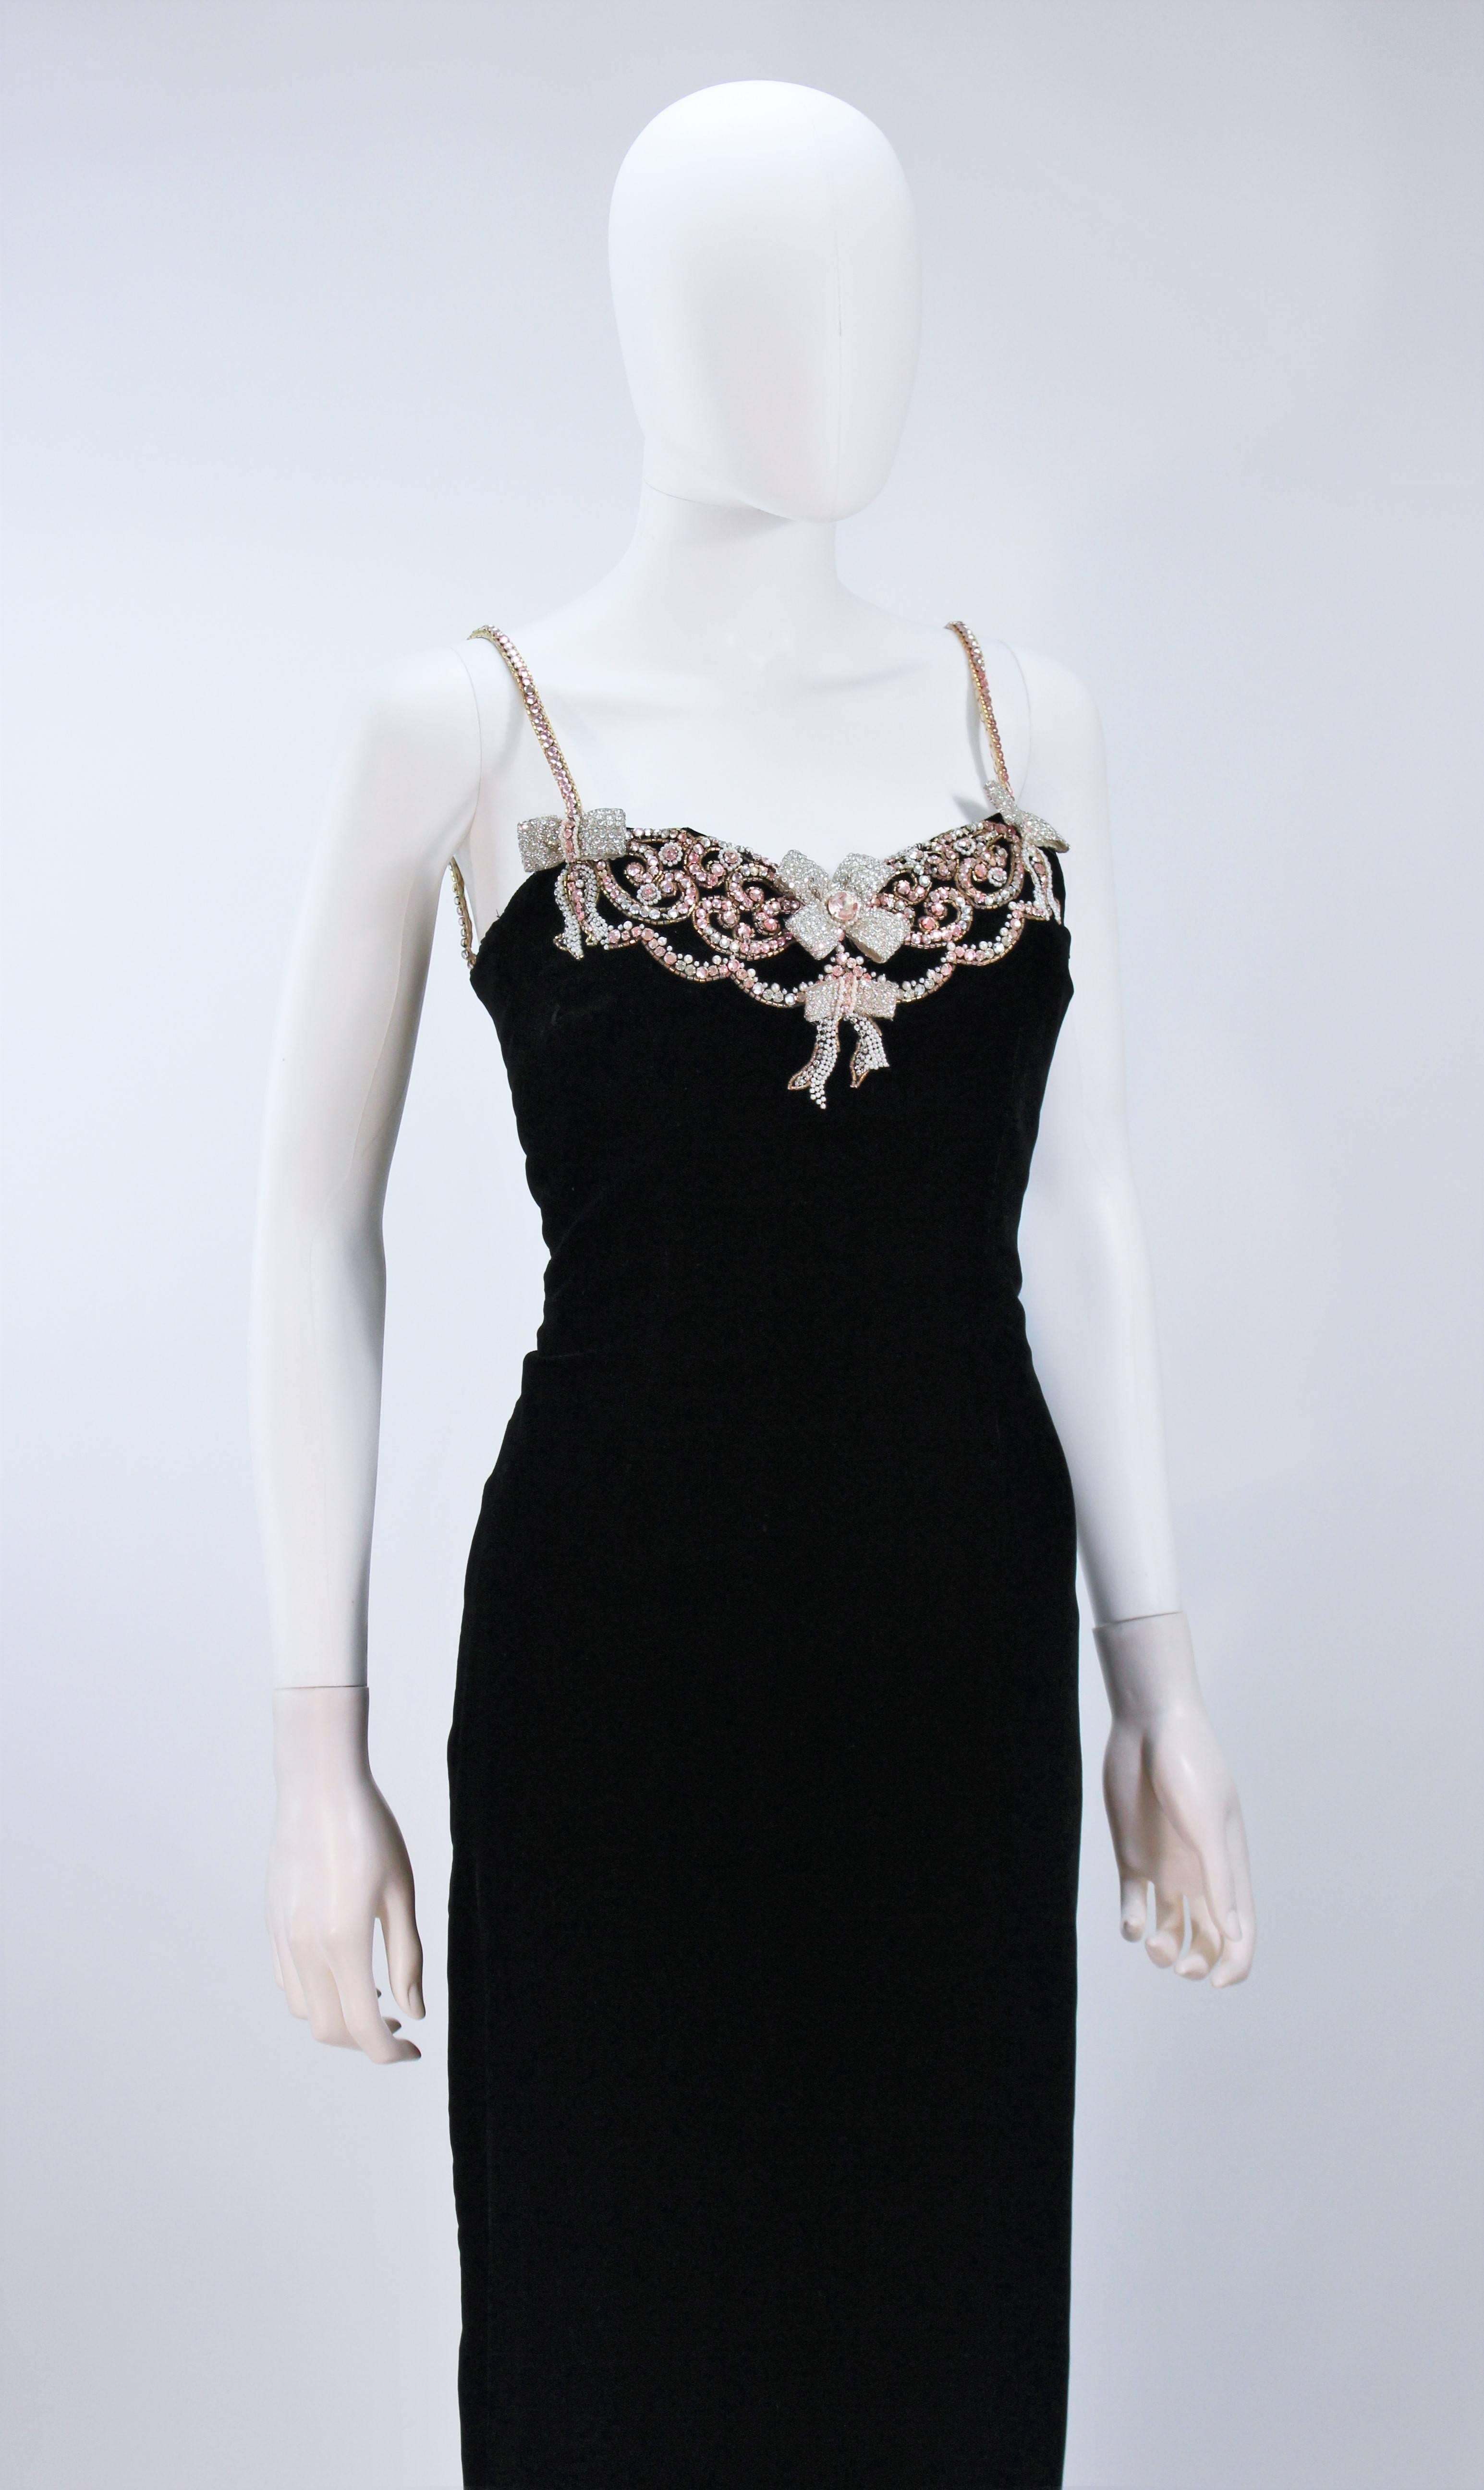 CAROLYN ROEHM Black Velvet Gown with Bows & Embellished Neckline Size 6-8 3